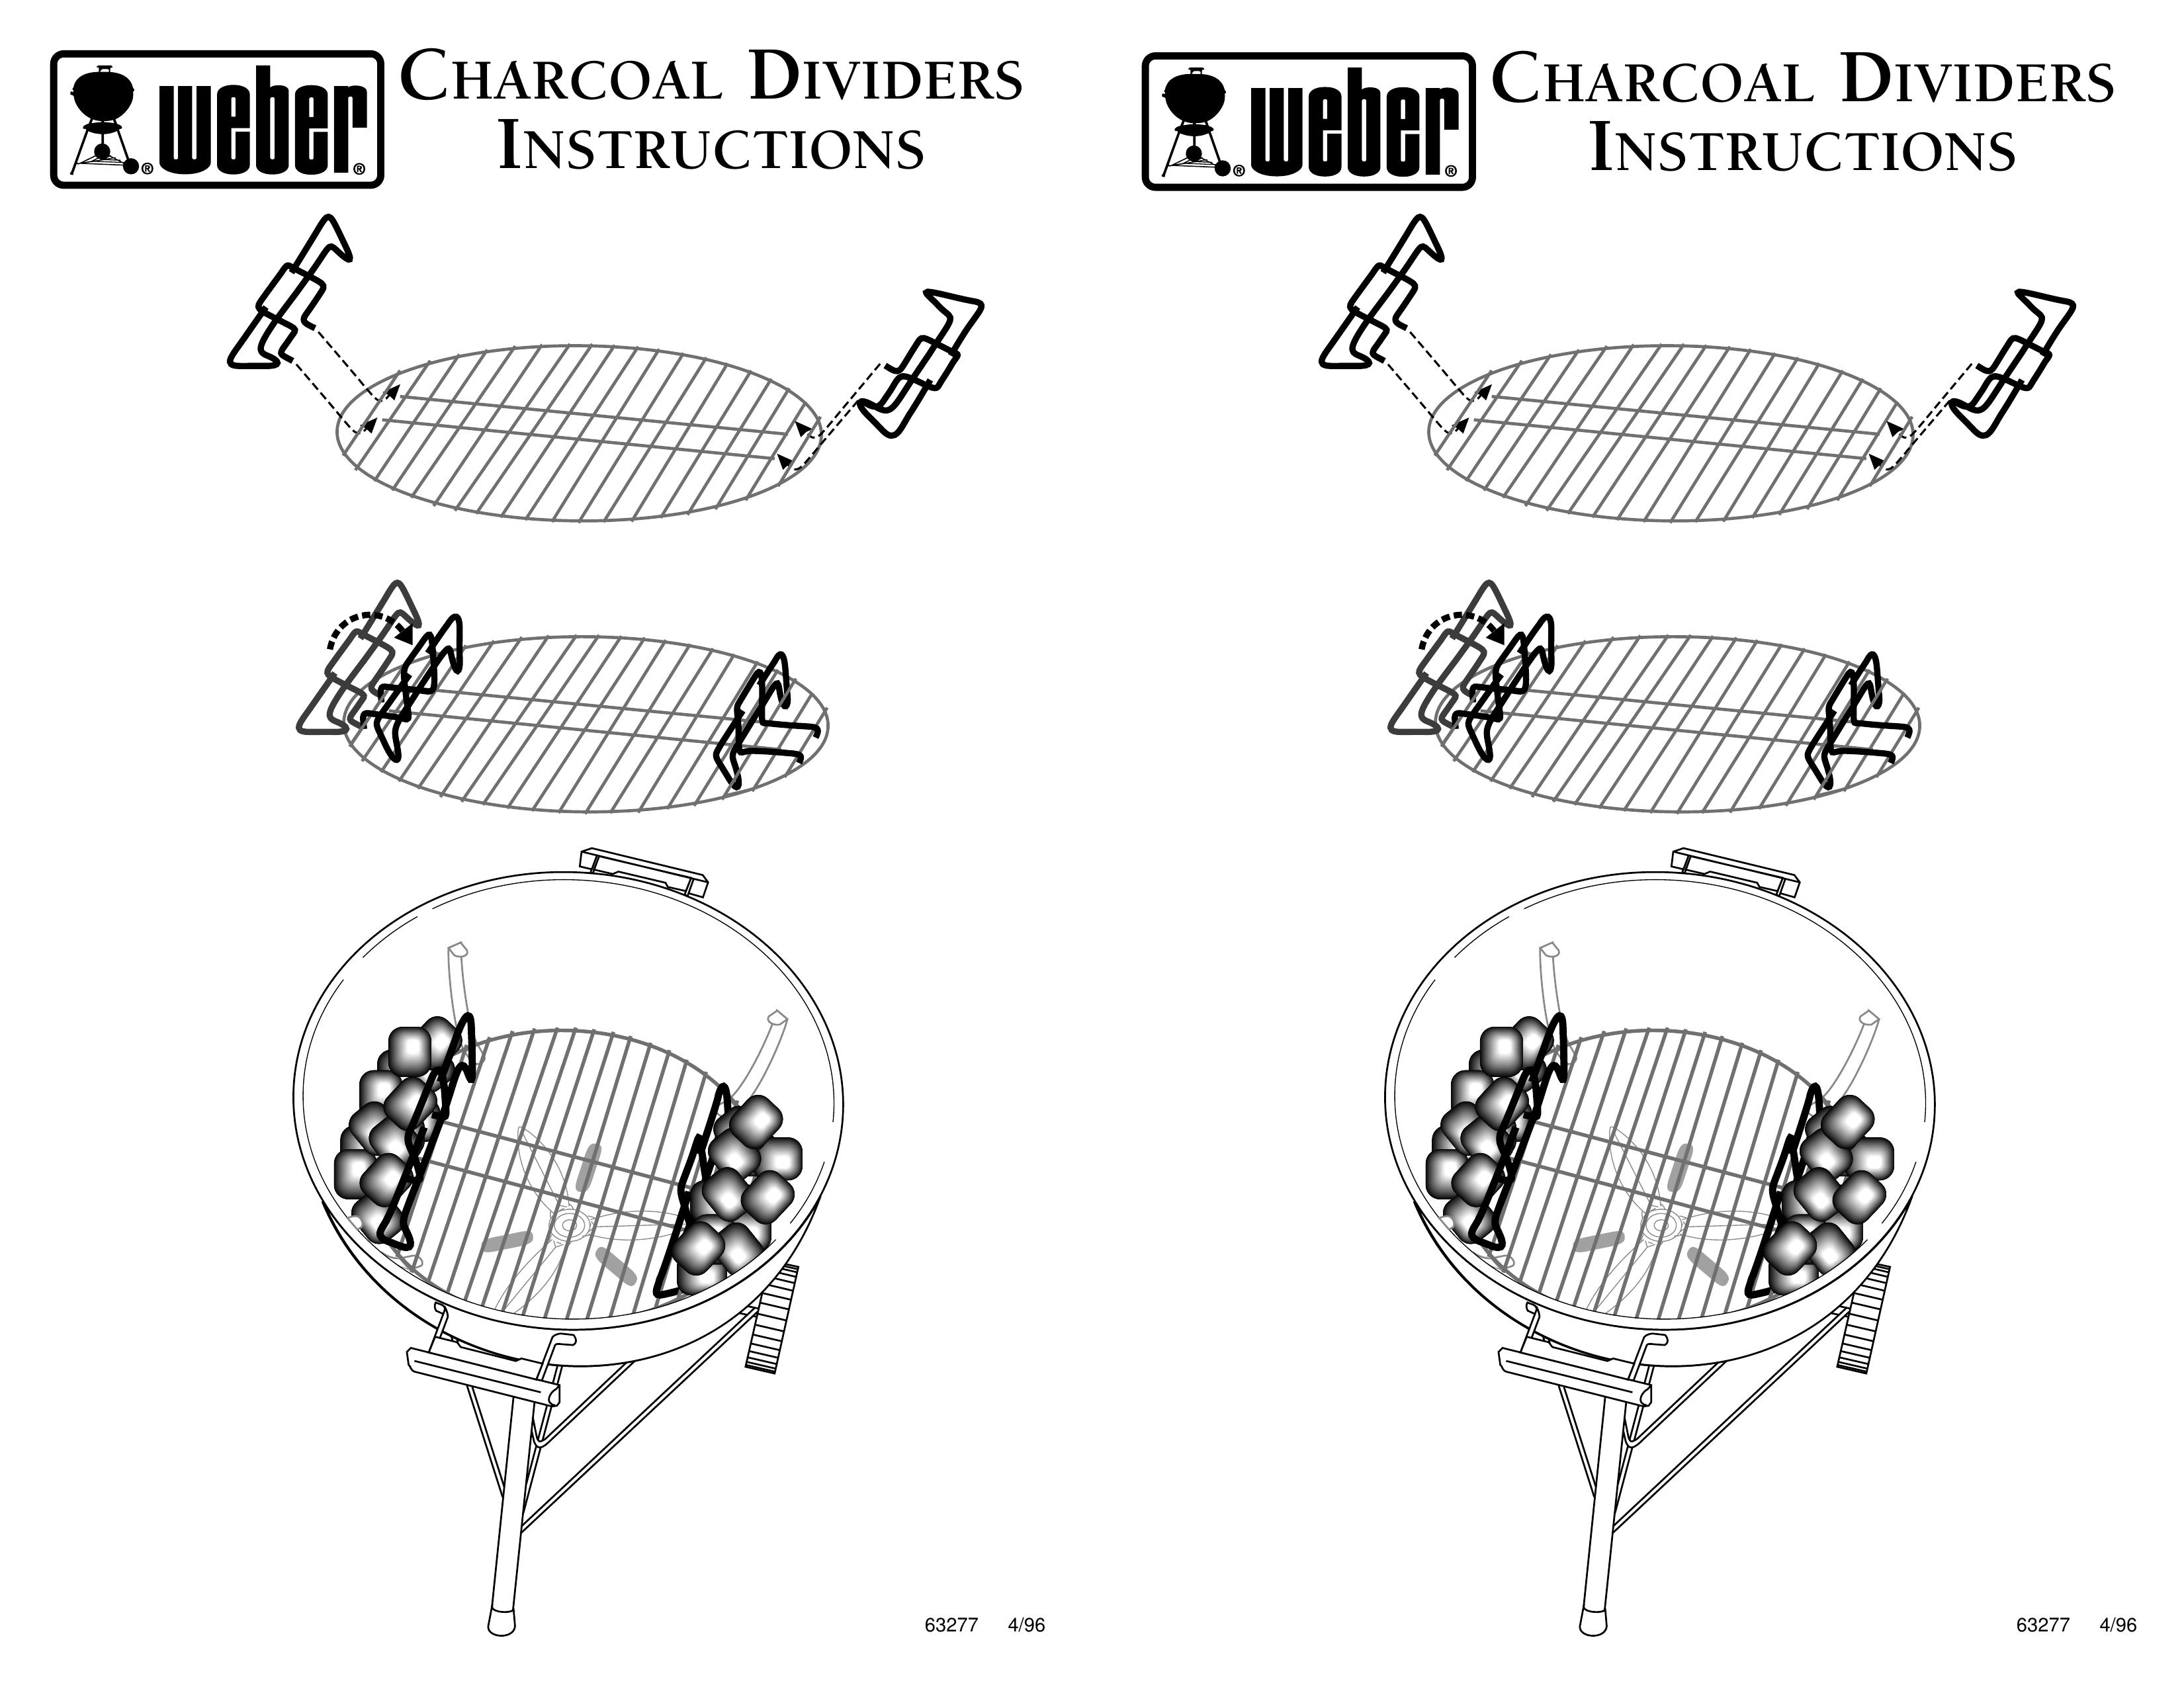 Weber 63277.0416666667 Charcoal Grill User Manual